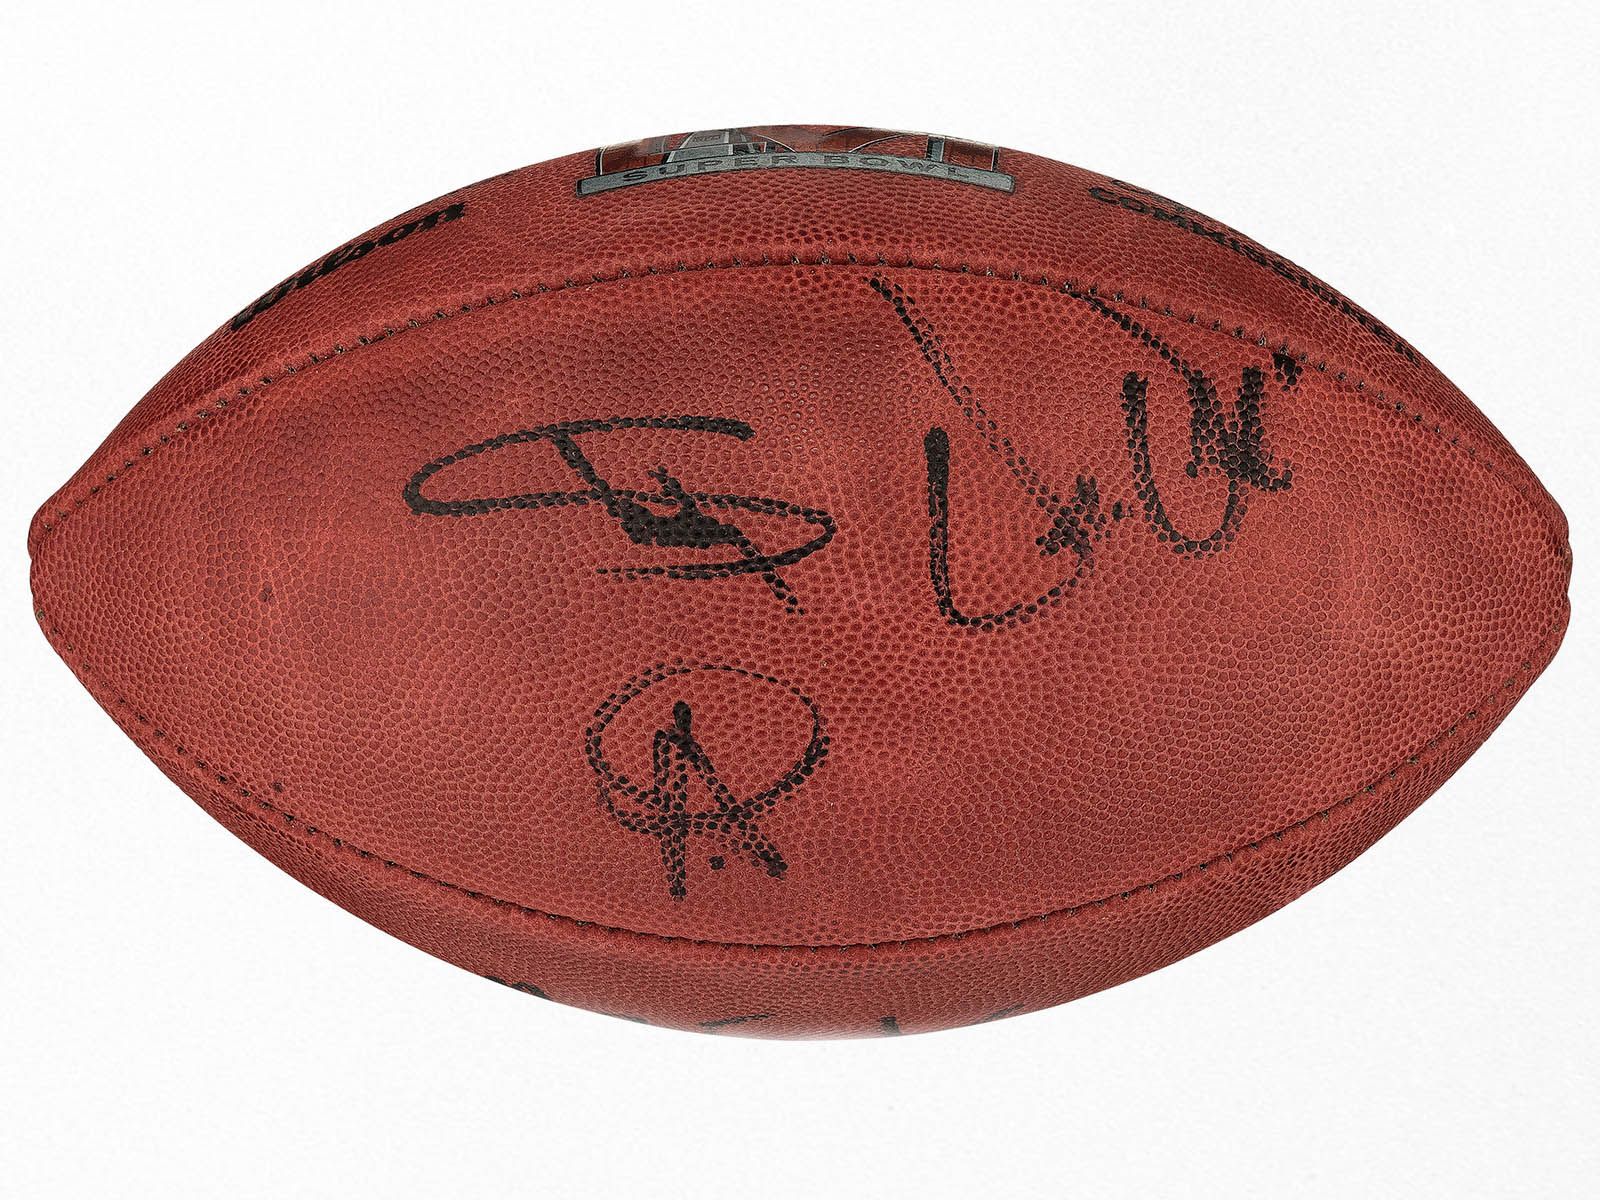 Super Bowl ball signed by singers goes up for auction